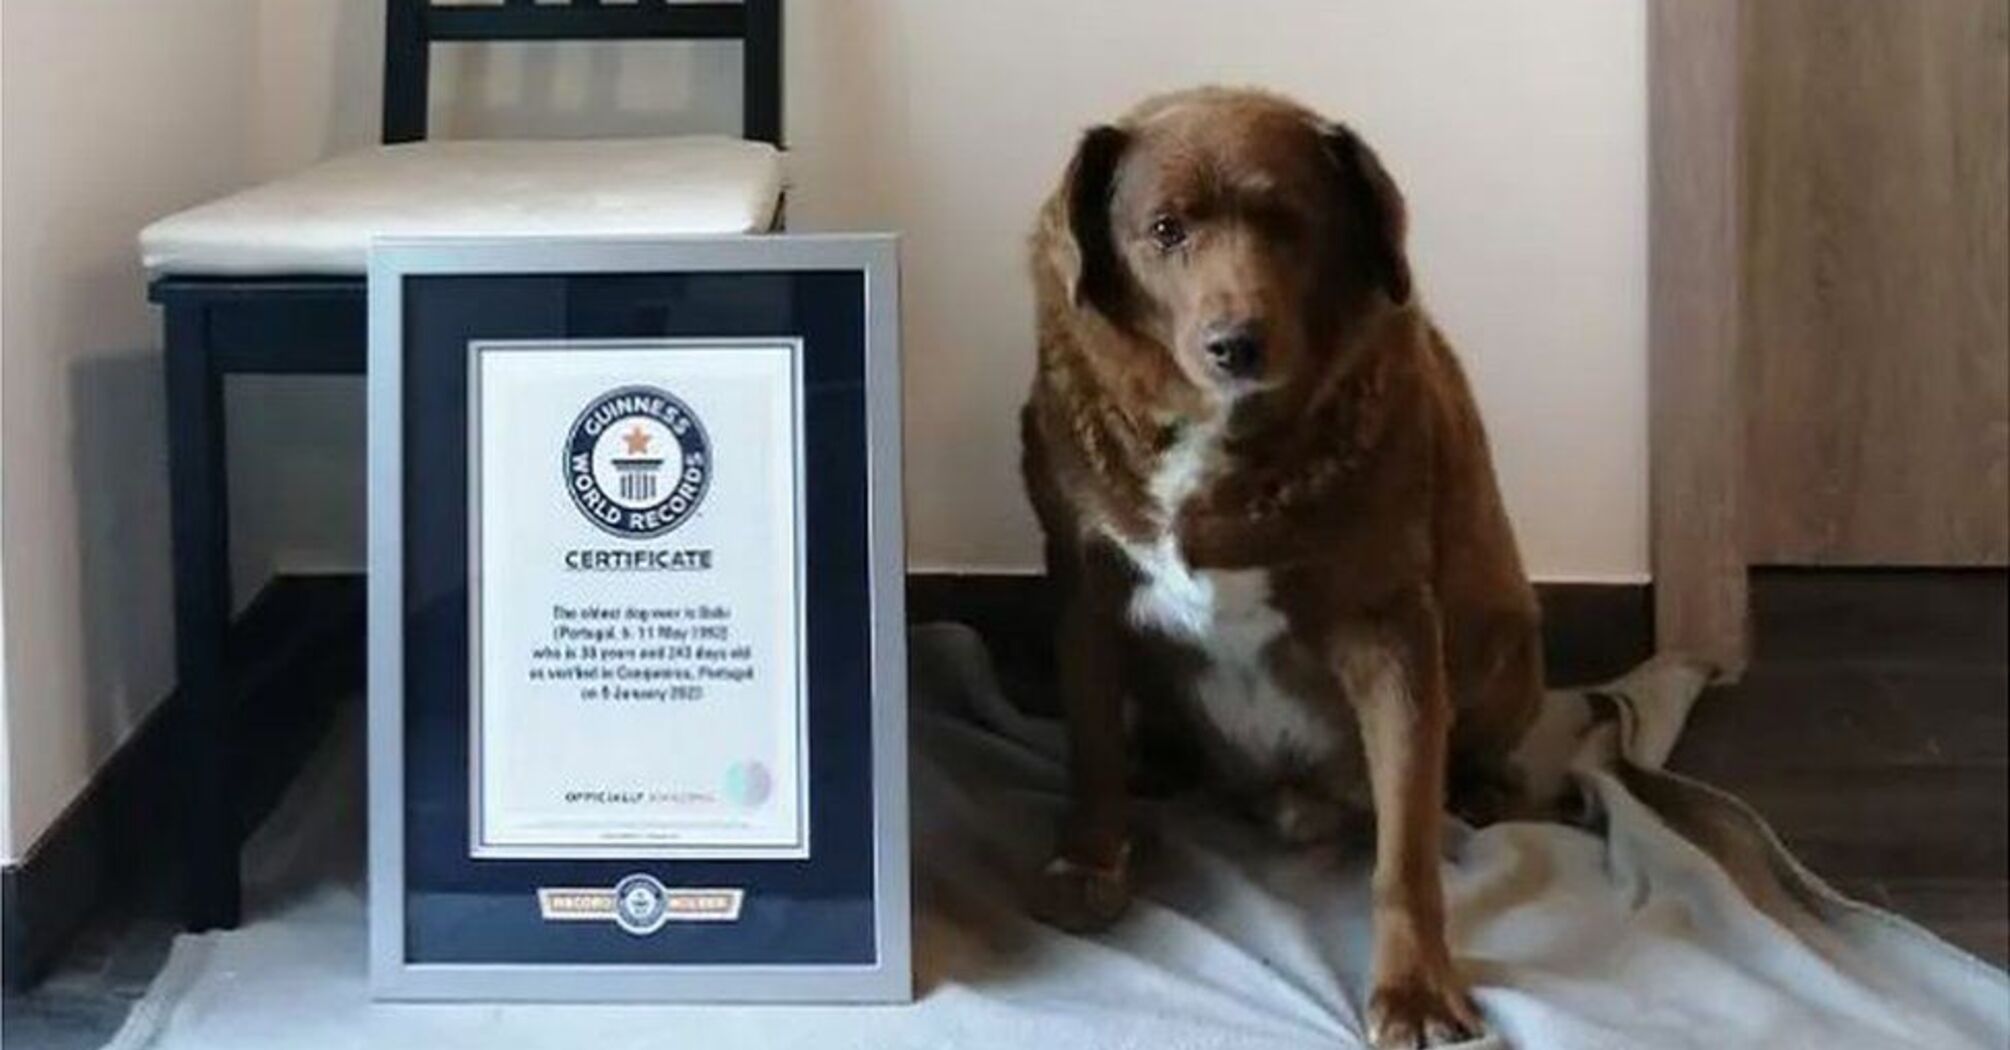 The Guinness World Records has stripped Bobby of the title of the oldest dog